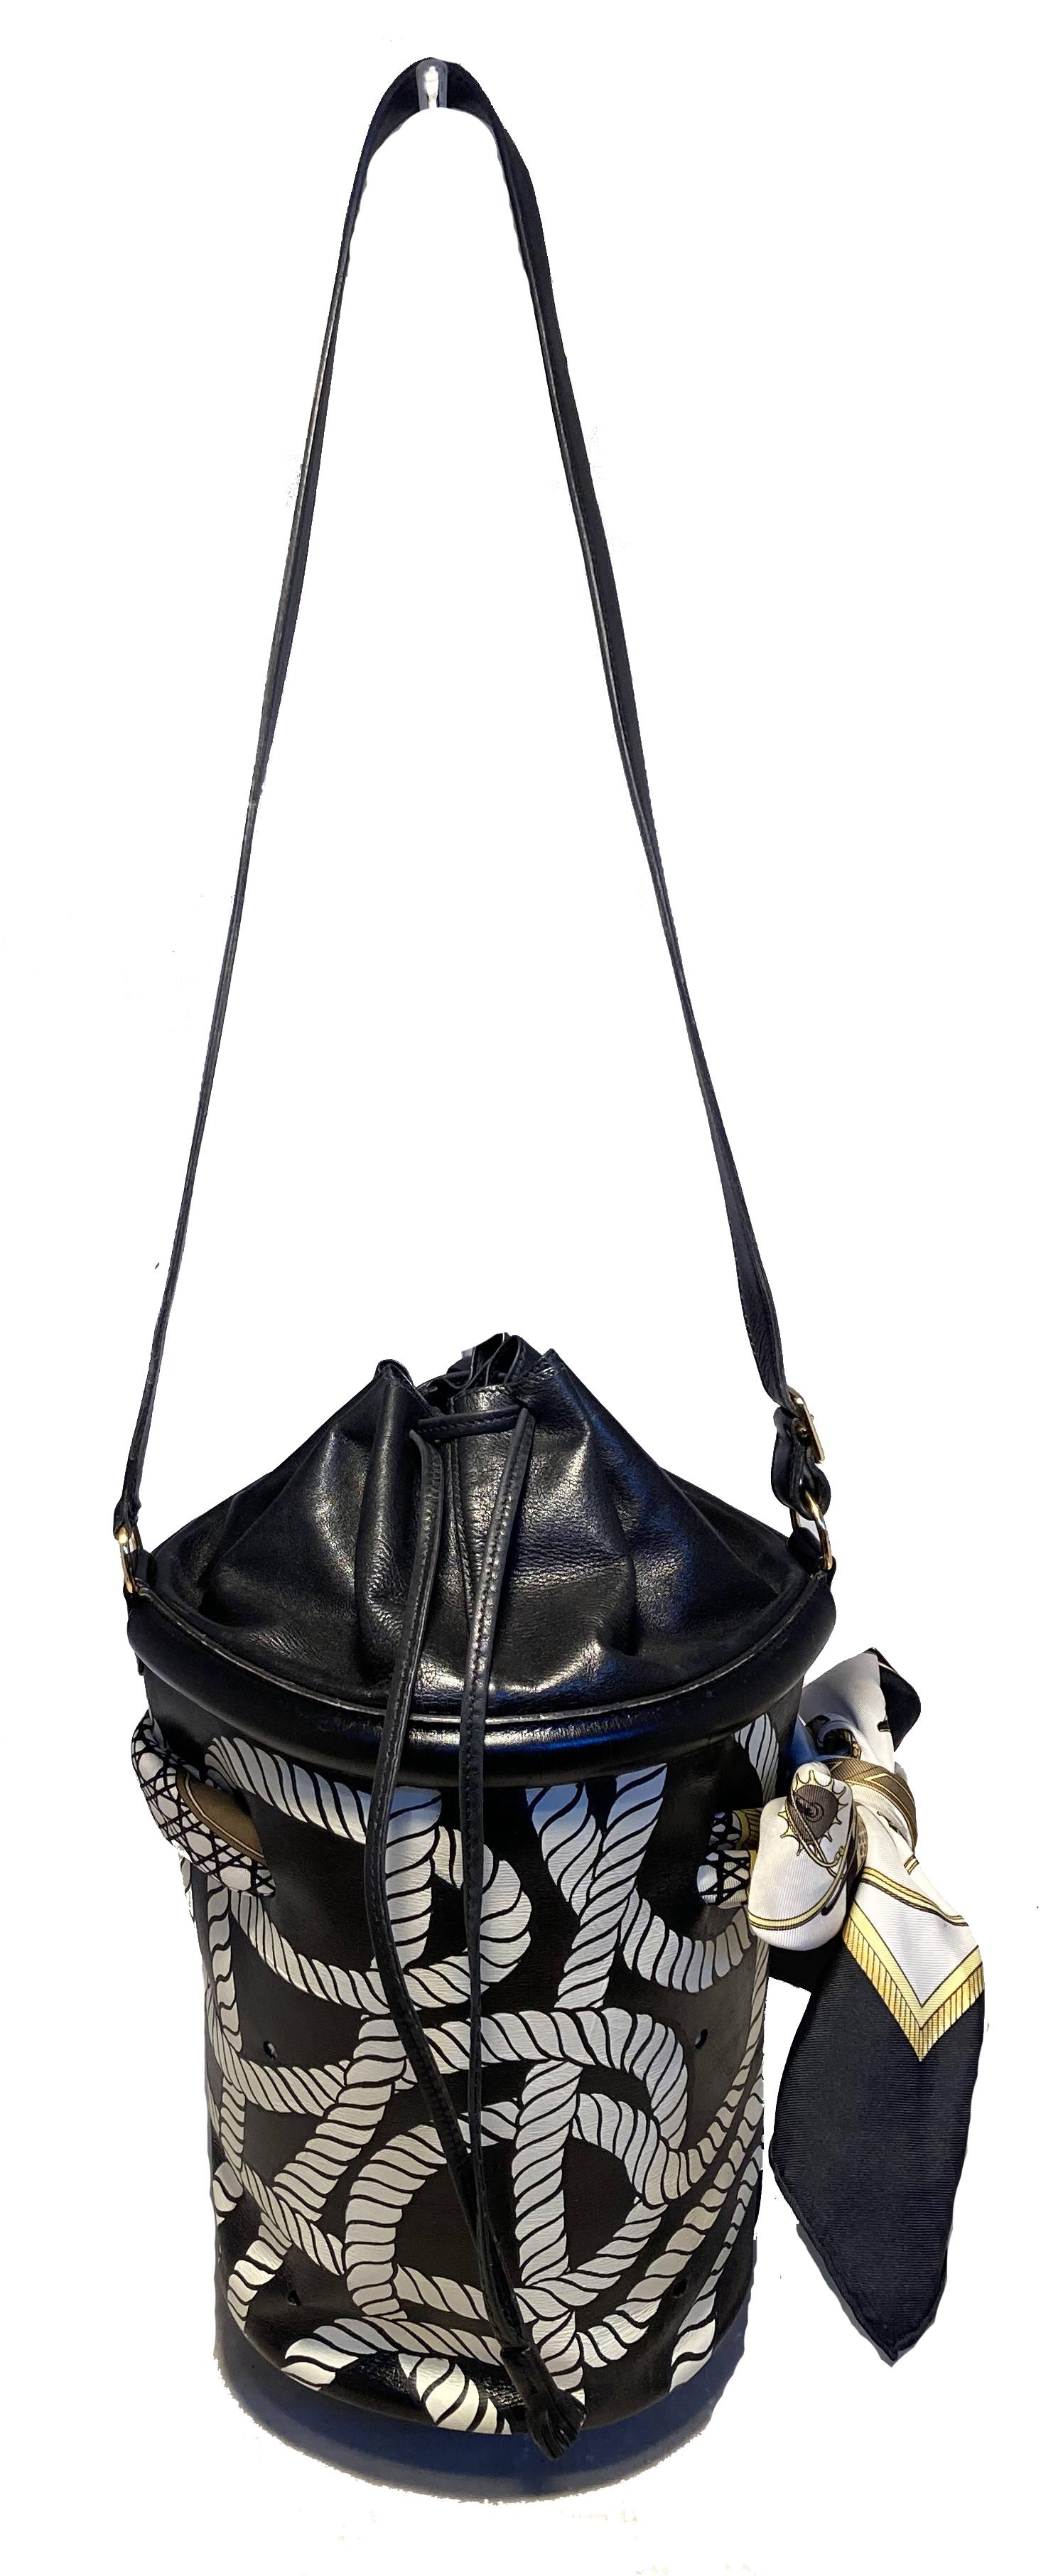 Vintage Hermes Hand Painted Ropes Bucket Bag in very good condition. Black box calf leather exterior with small holes and hand painted white ropes pattern throughout. Matching black and white Hermes silk scarf woven in and out of top edge and tied